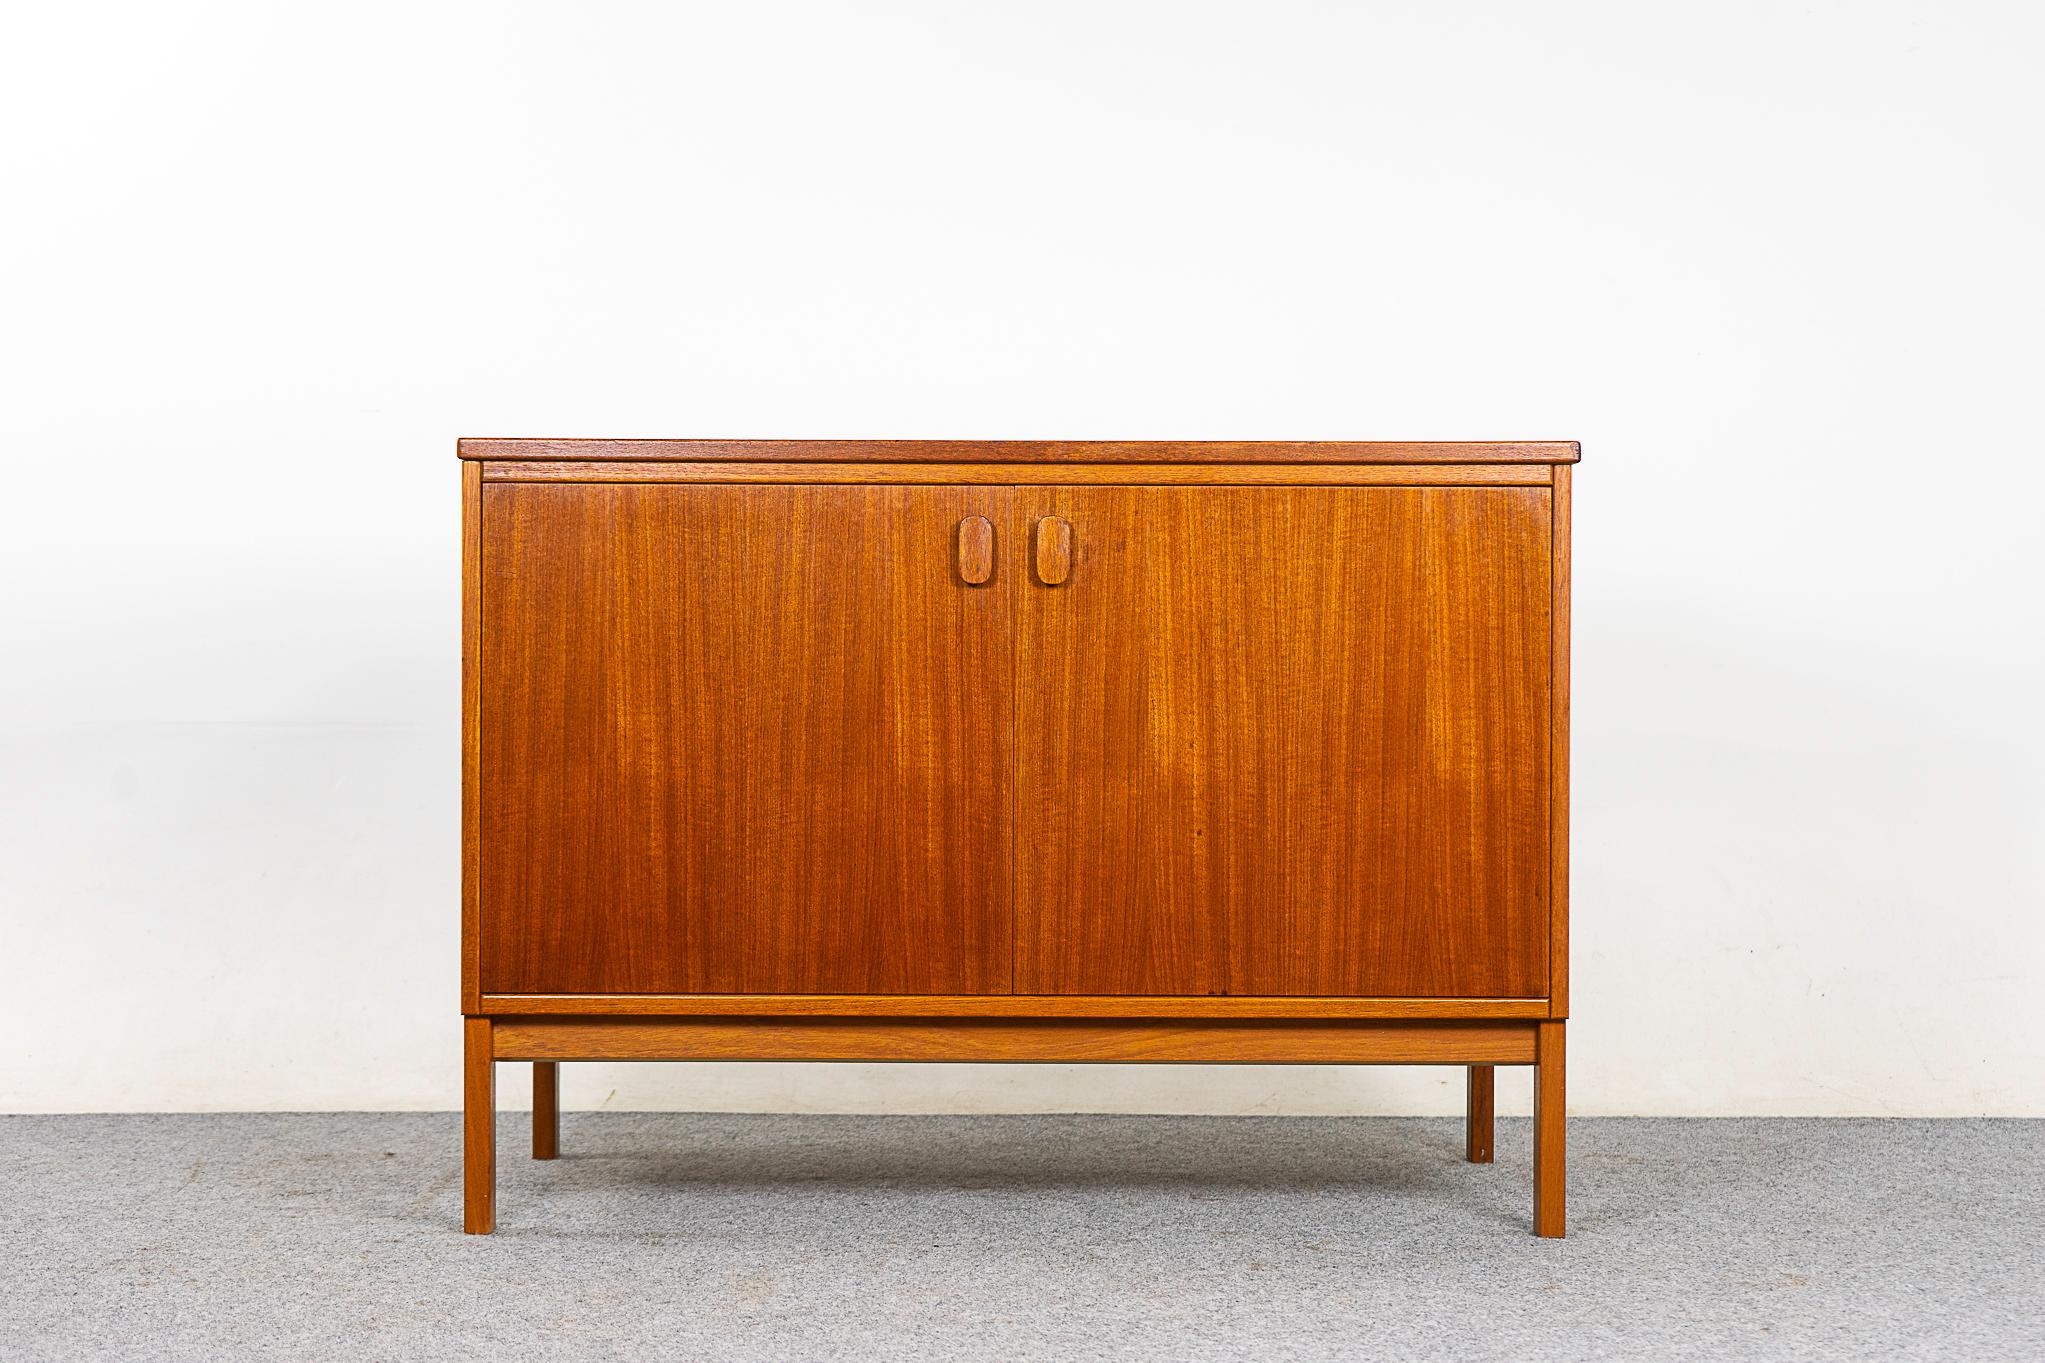 Teak double door cabinet by Ulferts, circa 1960s. Clean, simple lined design highlights the exceptional book-matched veneer. Small interior drawers and adjustable shelf, a perfect condo sized storage solution.

Unrestored item, some marks consistent